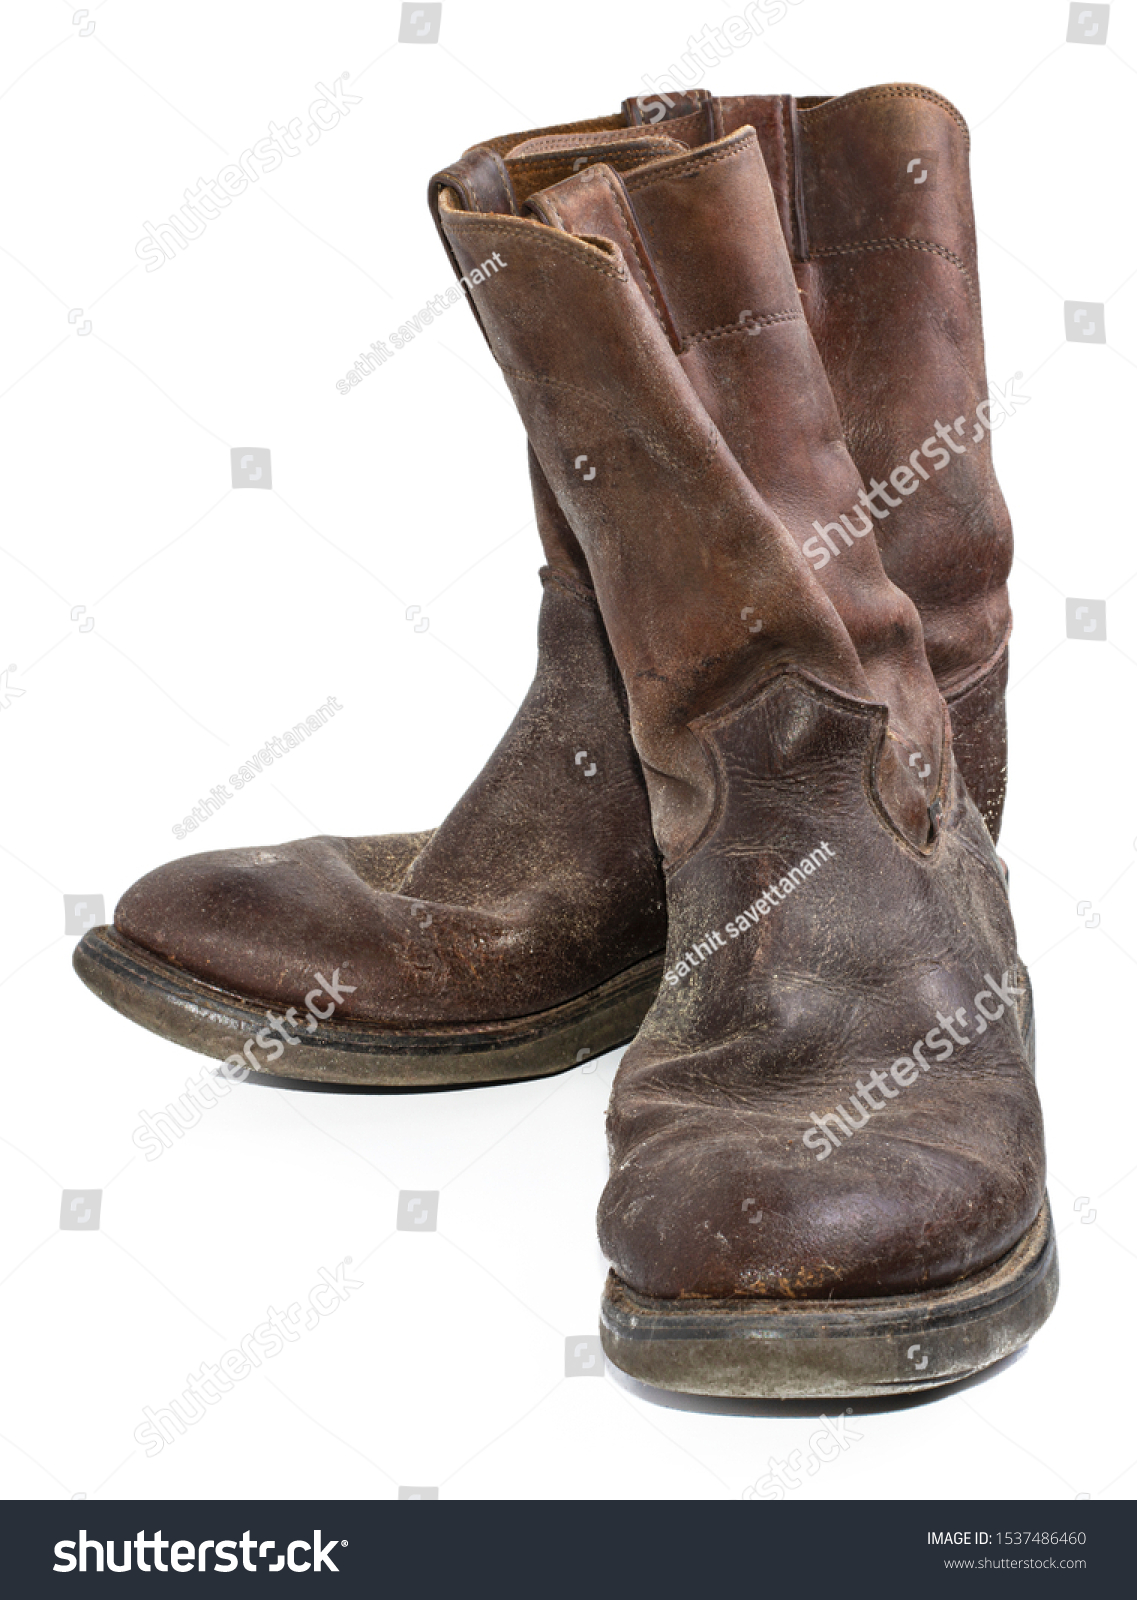 48,935 Old fashioned boots Images, Stock Photos & Vectors | Shutterstock